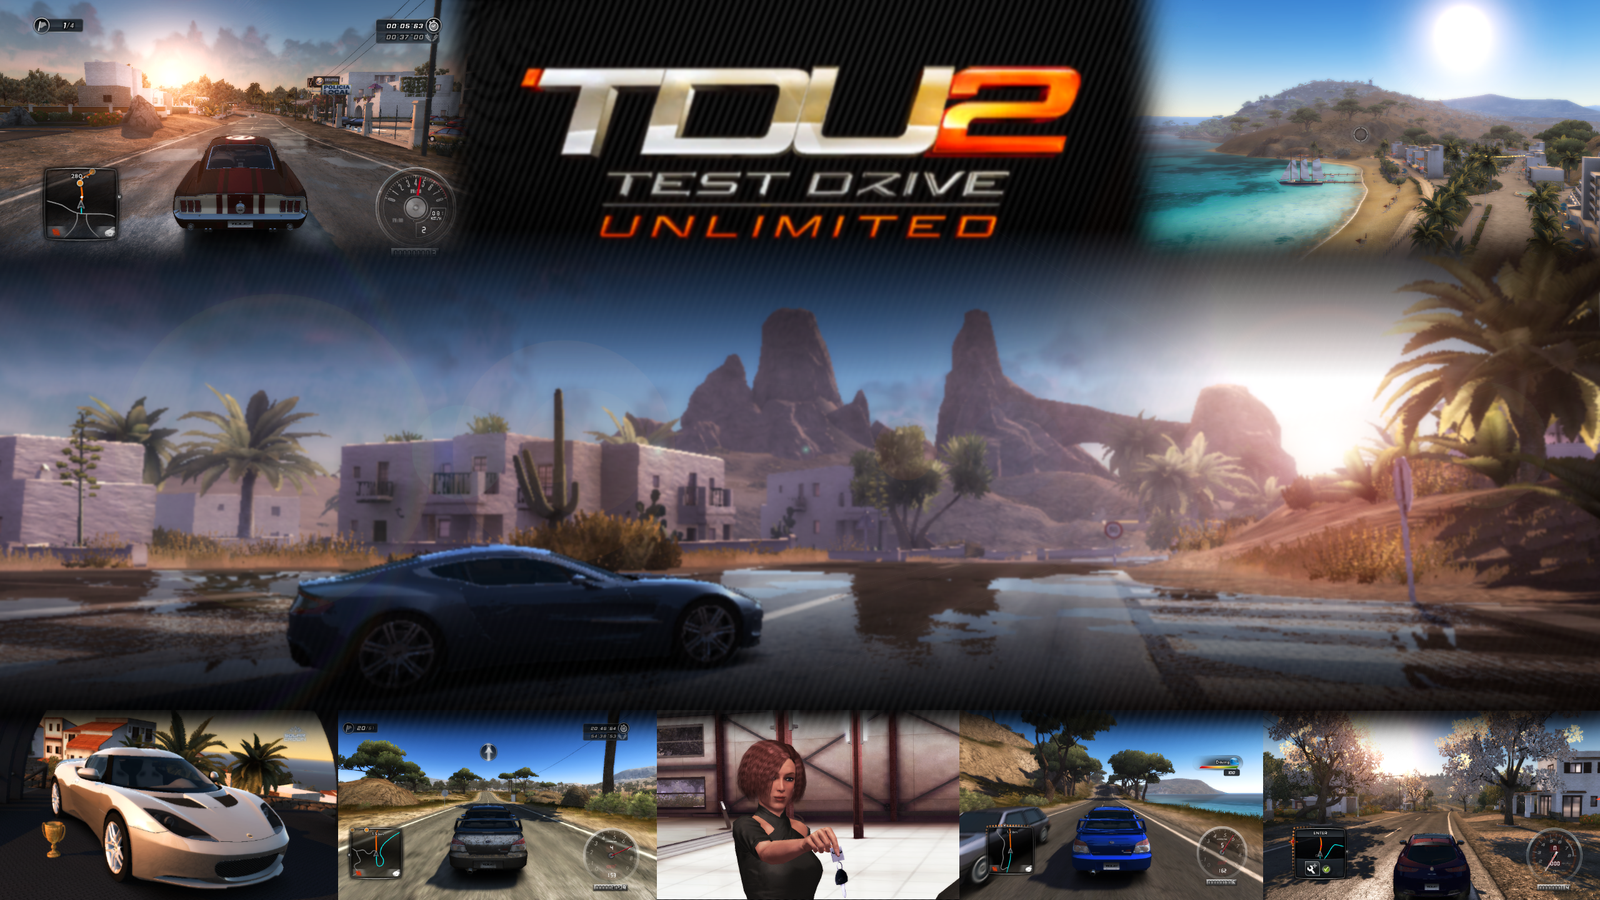 PC FULL VERSION GAMES AND SOFTWARE: Test Drive Unlimited 2 full version for PC